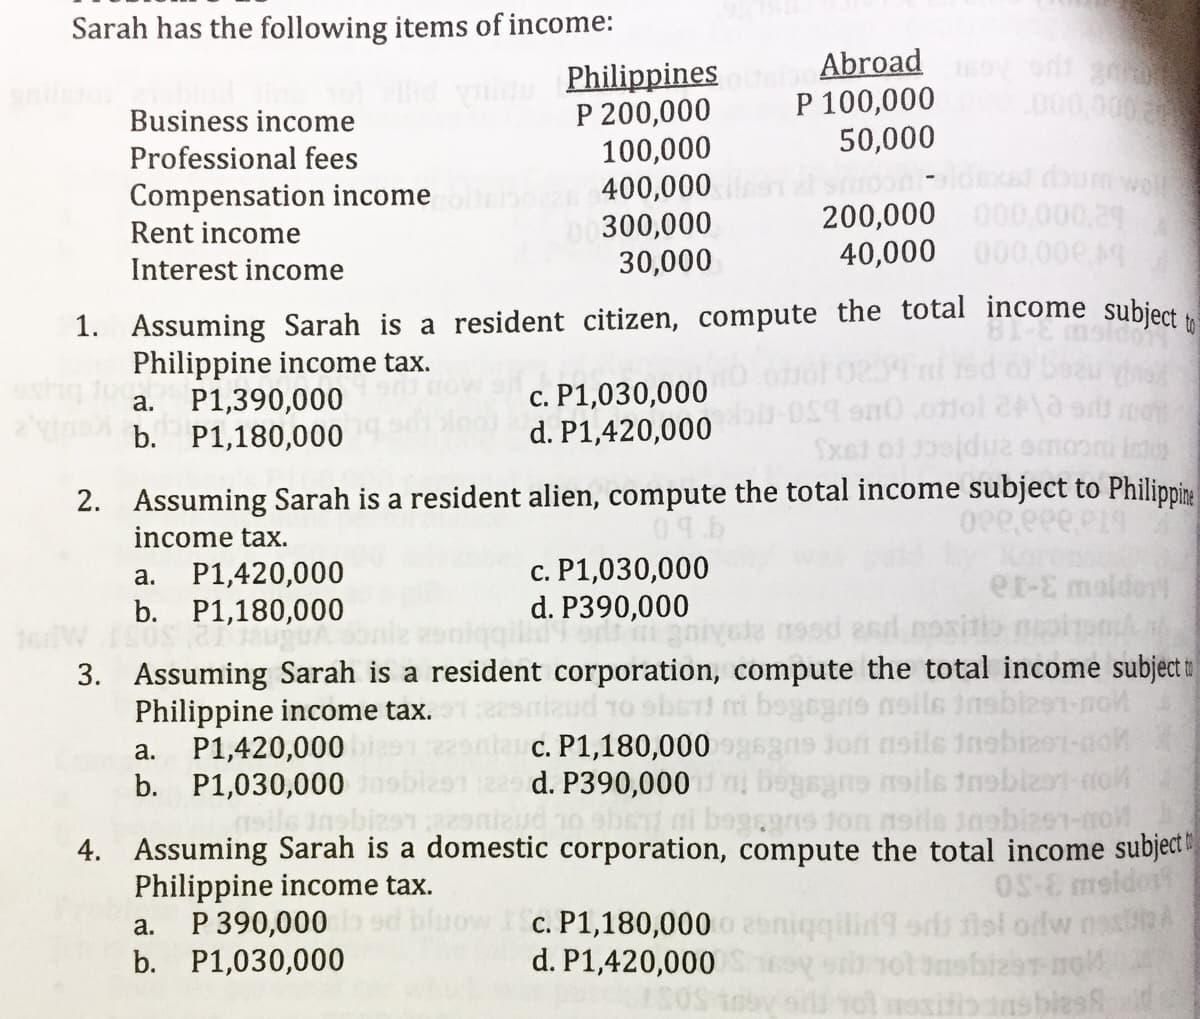 Sarah has the following items of income:
Abroad
P 100,000
50,000
Philippines
P 200,000
100,000
400,000
300,000
30,000
000000
Business income
Professional fees
Compensation income
Rent income
200,000 000.000,29
40,000 000.0oe 49
Interest income
1. Assuming Sarah is a resident citizen, compute the total income subject
Philippine income tax.
P1,390,000
b. P1,180,000
c. P1,030,000
d. P1,420,000
а.
Sxel ol 0jdua omor
Isto
2. Assuming Sarah is a resident alien, compute the total income subject to Philippine
income tax.
P1,420,000
b. P1,180,000
c. P1,030,000
d. P390,000
a.
er-E maldor
19sd 2sd
3. Assuming Sarah is a resident corporation, compute the total income subject t
Philippine income tax.
P1,420,000
b. P1,030,000
gajon noile inabize
c. P1,180,000
d. P390,000
ho ebs ni bogegns ton neils inabize1-no
а.
4. Assuming Sarah is a domestic corporation, compute the total income subject
Philippine income tax.
P 390,000
b. P1,030,000
OS-E
c. P1,180,000 o 2eniqqilid9 ors lol odw
nshizar no
0sy o ol mositio ans biesh
a.
d. P1,420,000
